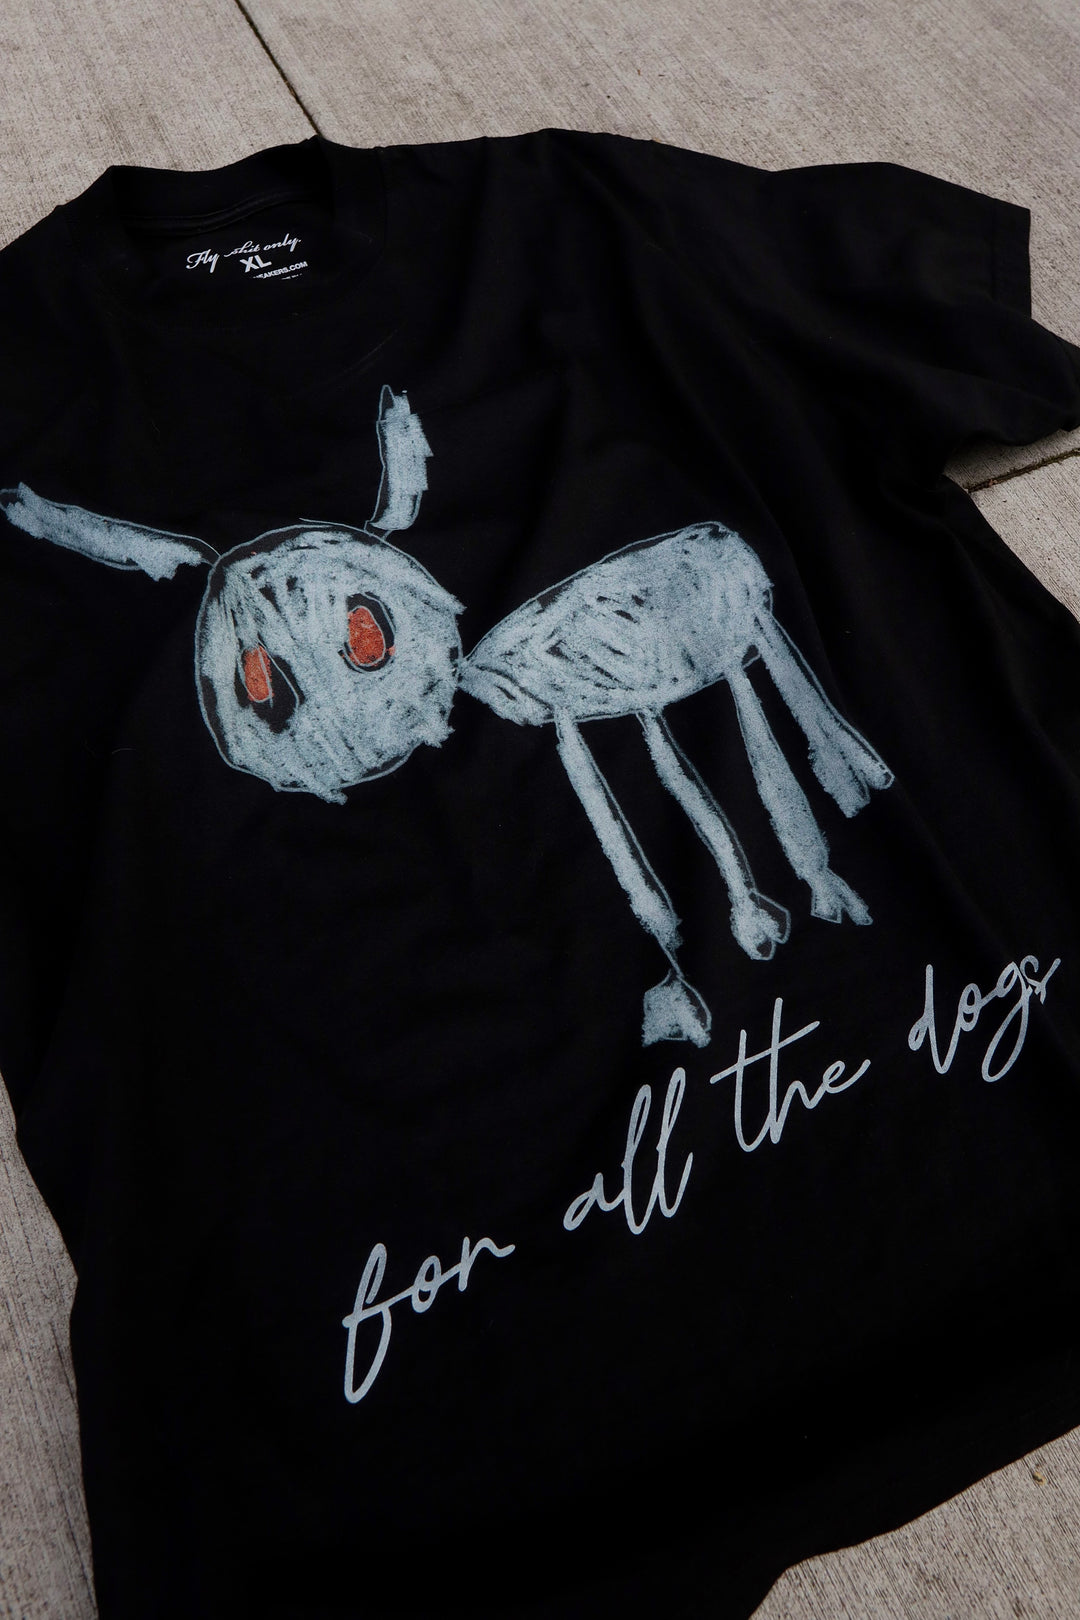 "For All The Dogs" T-Shirt